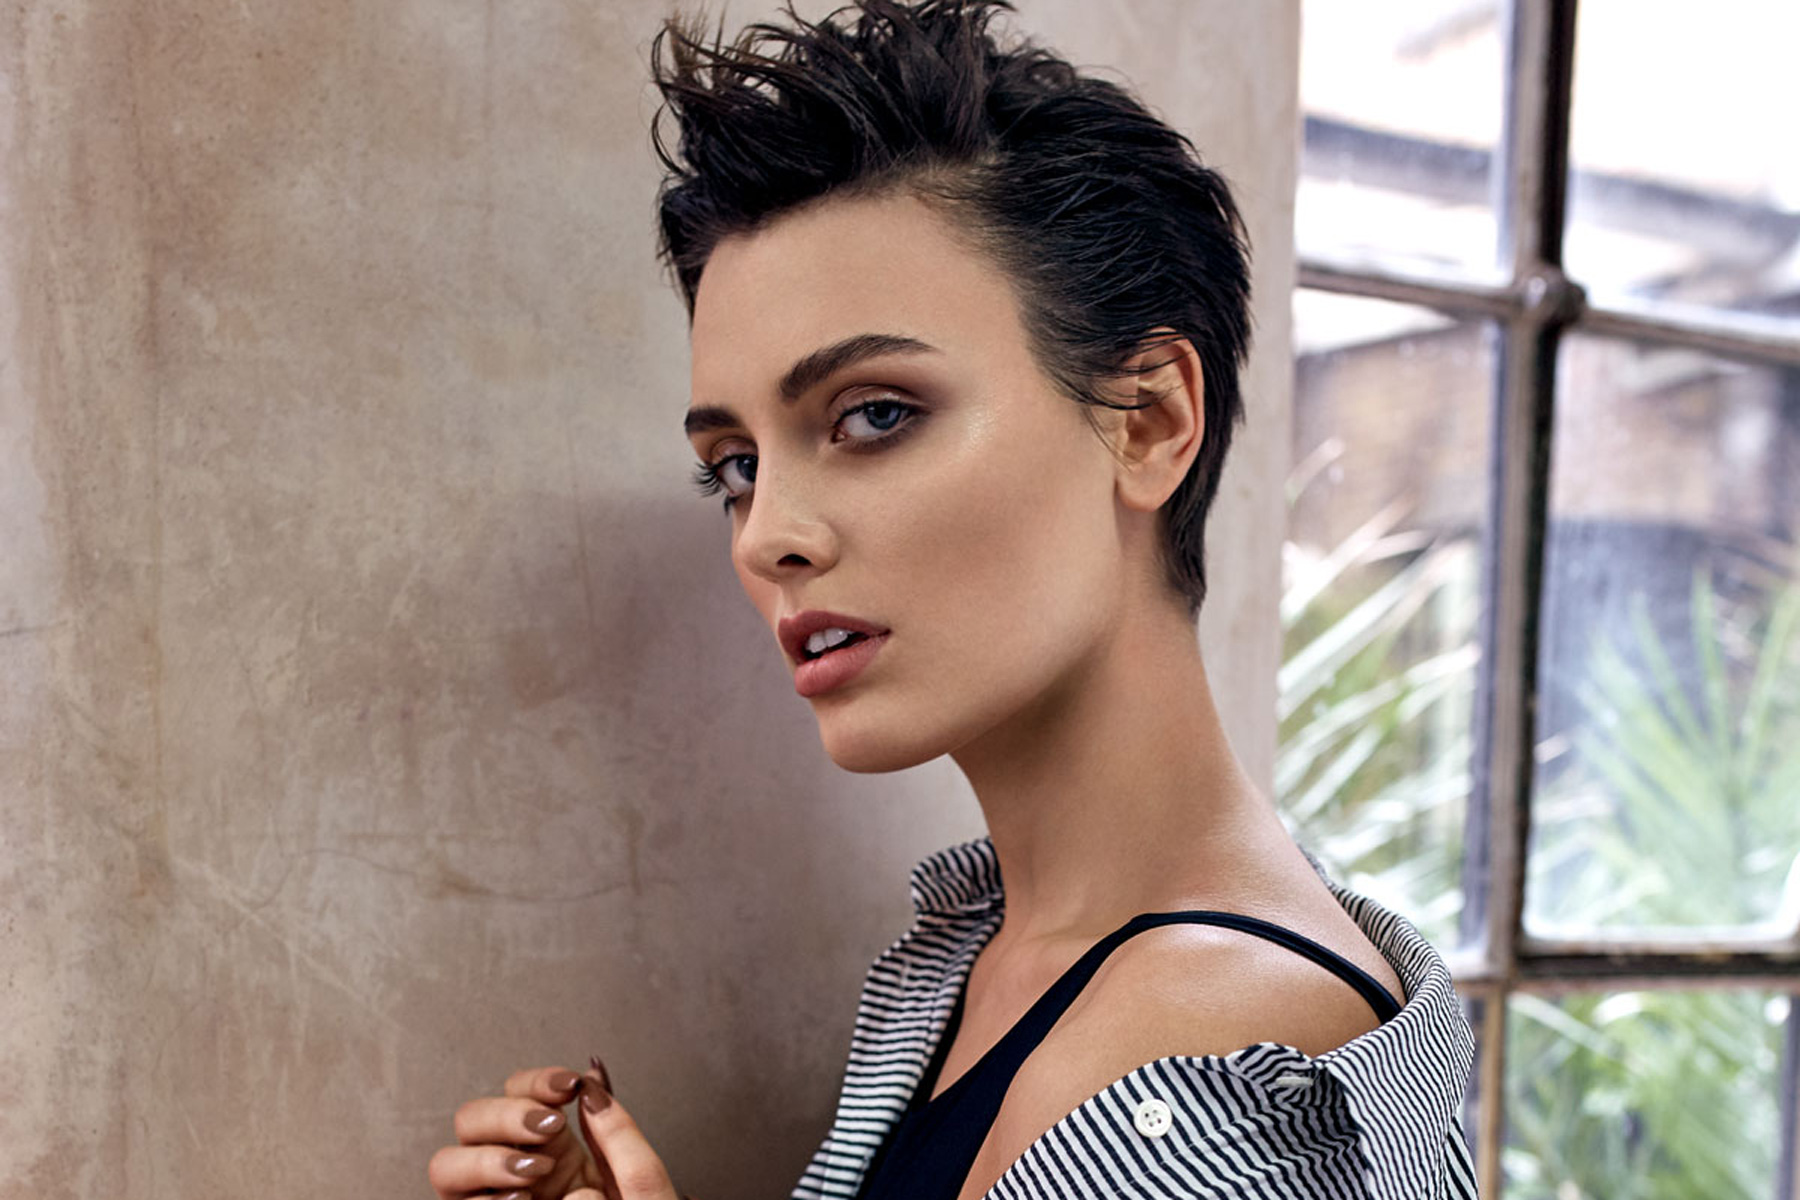 Wallis Day Height Feet Inches cm Weight Body Measurements